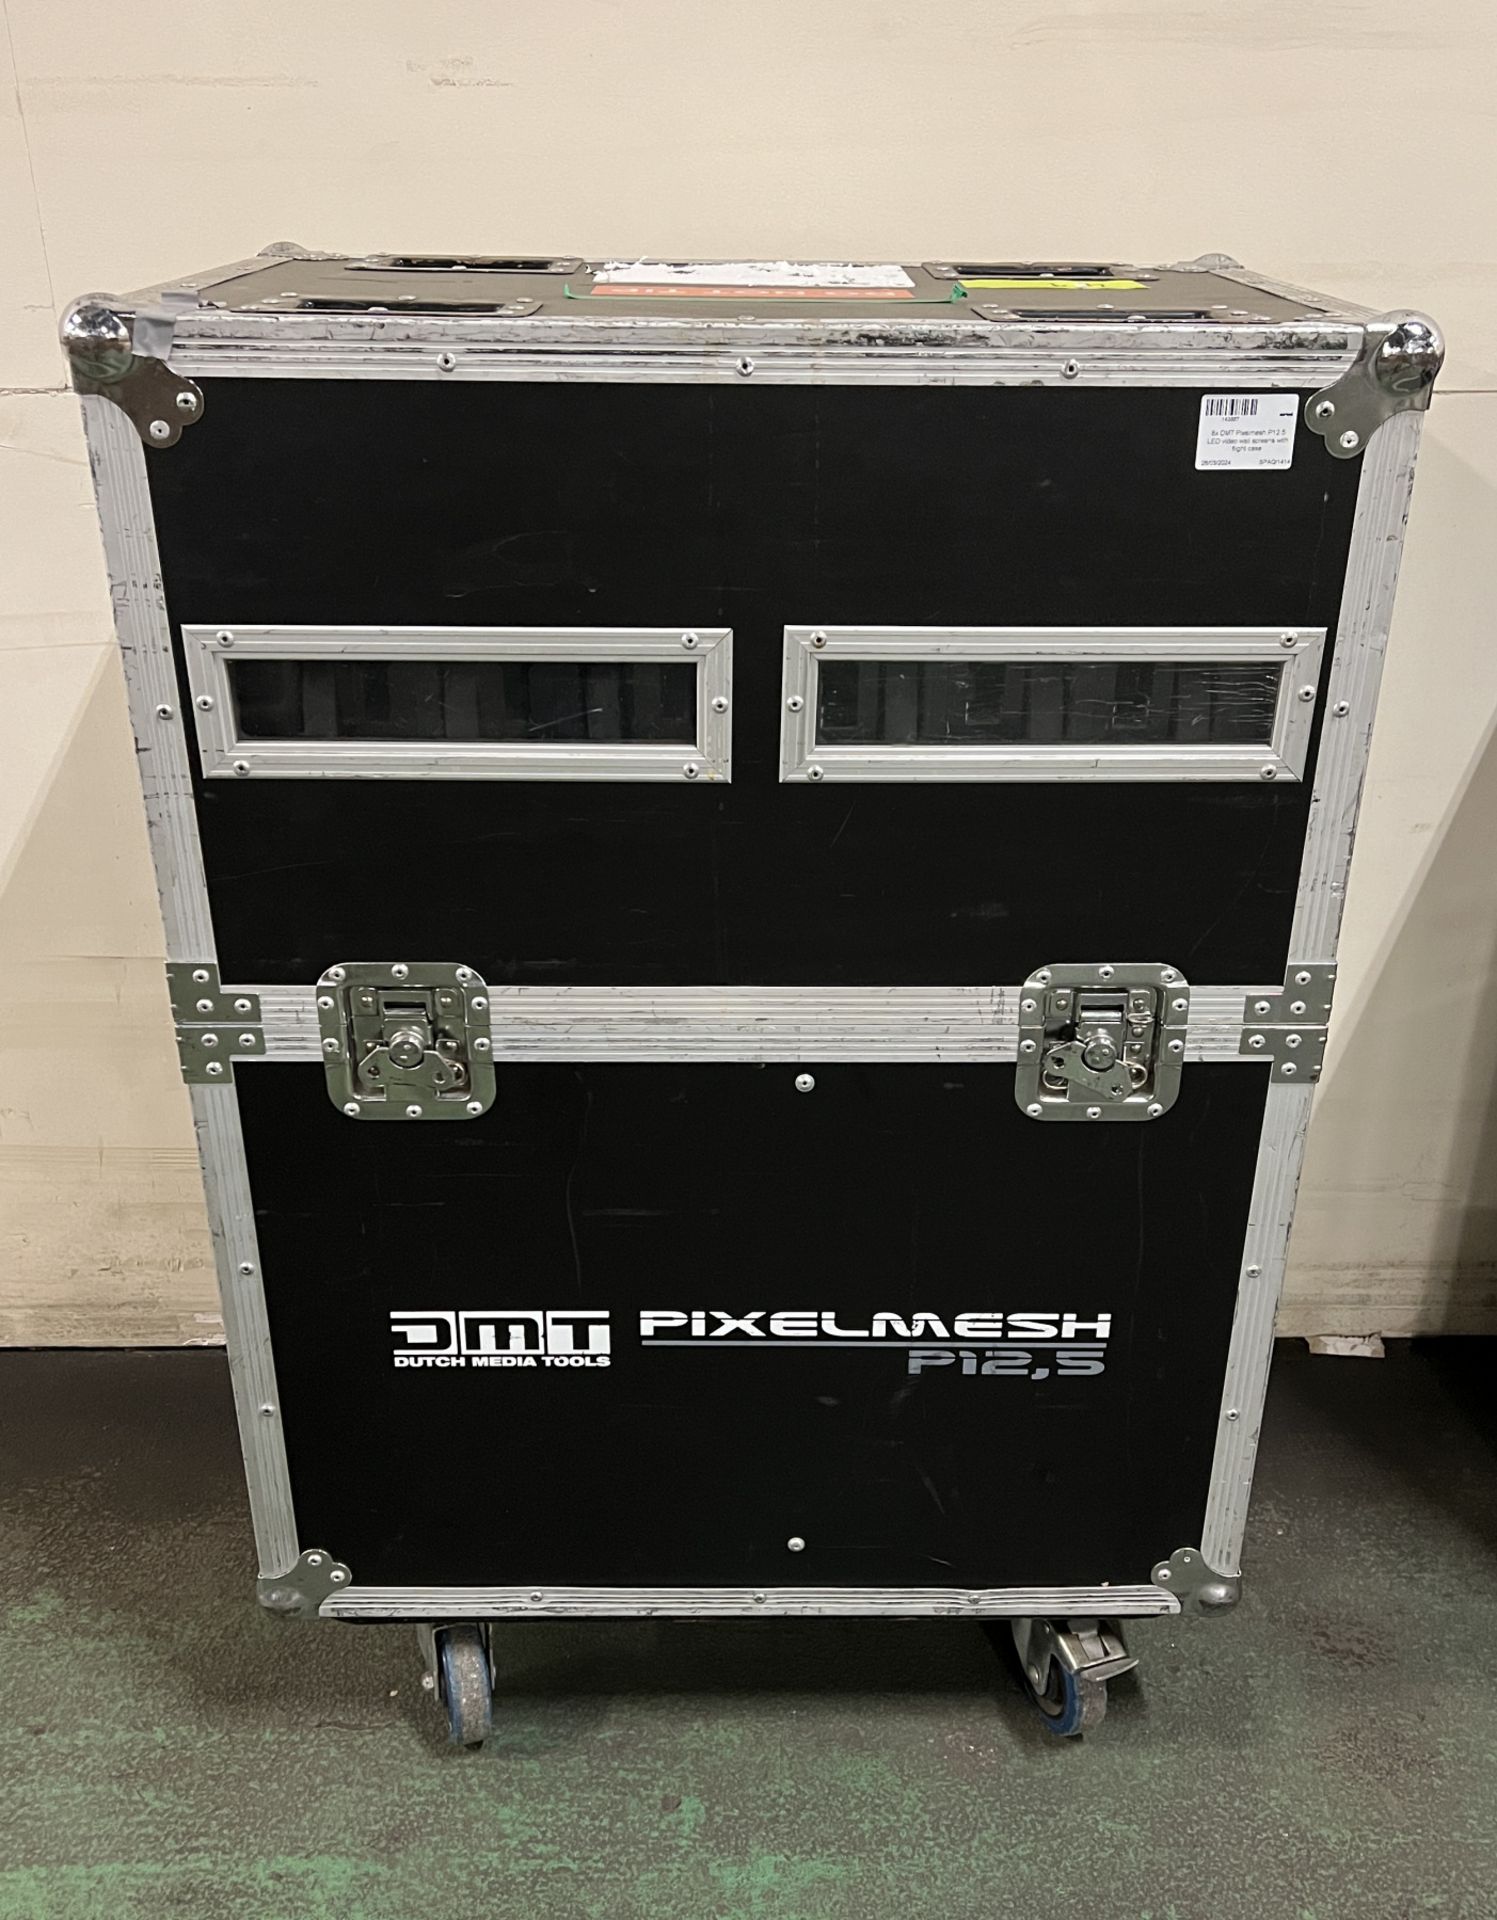 DMT Pixelmesh P12.5 LED video wall screens with flight cases - full details in description - Image 2 of 23